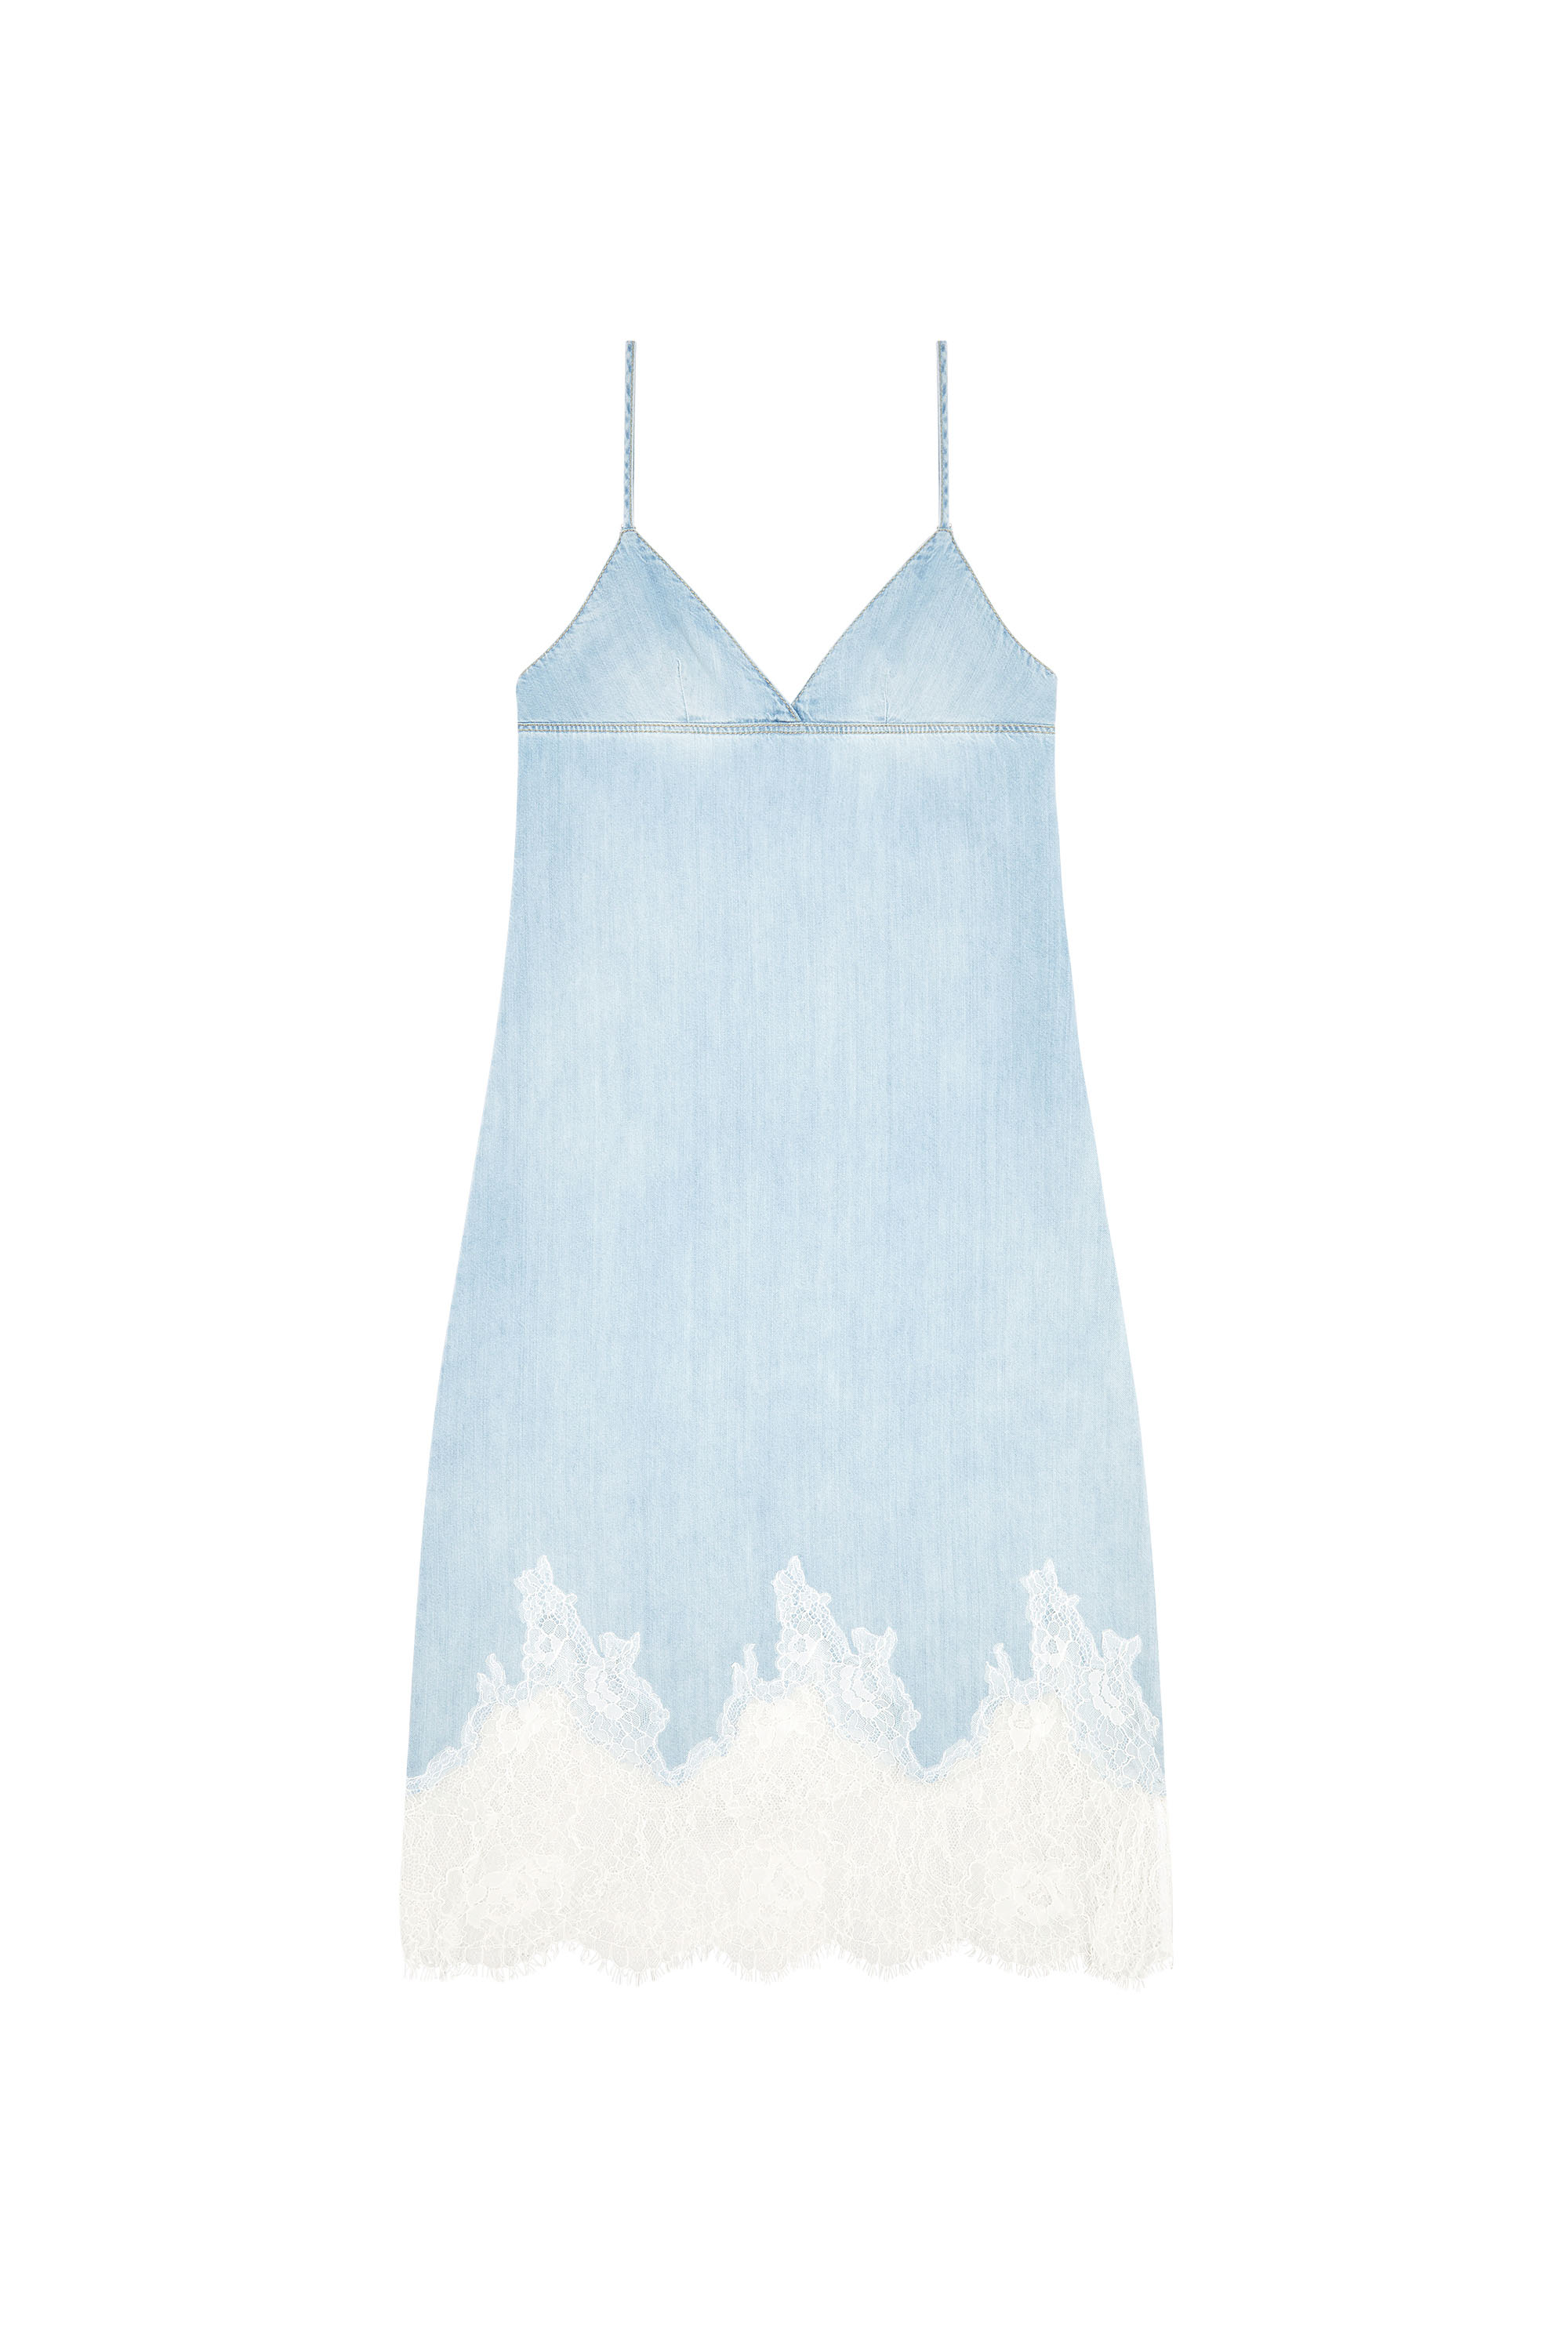 Diesel - DE-RUDE-S, Woman Strappy dress in denim and lace in Blue - Image 1